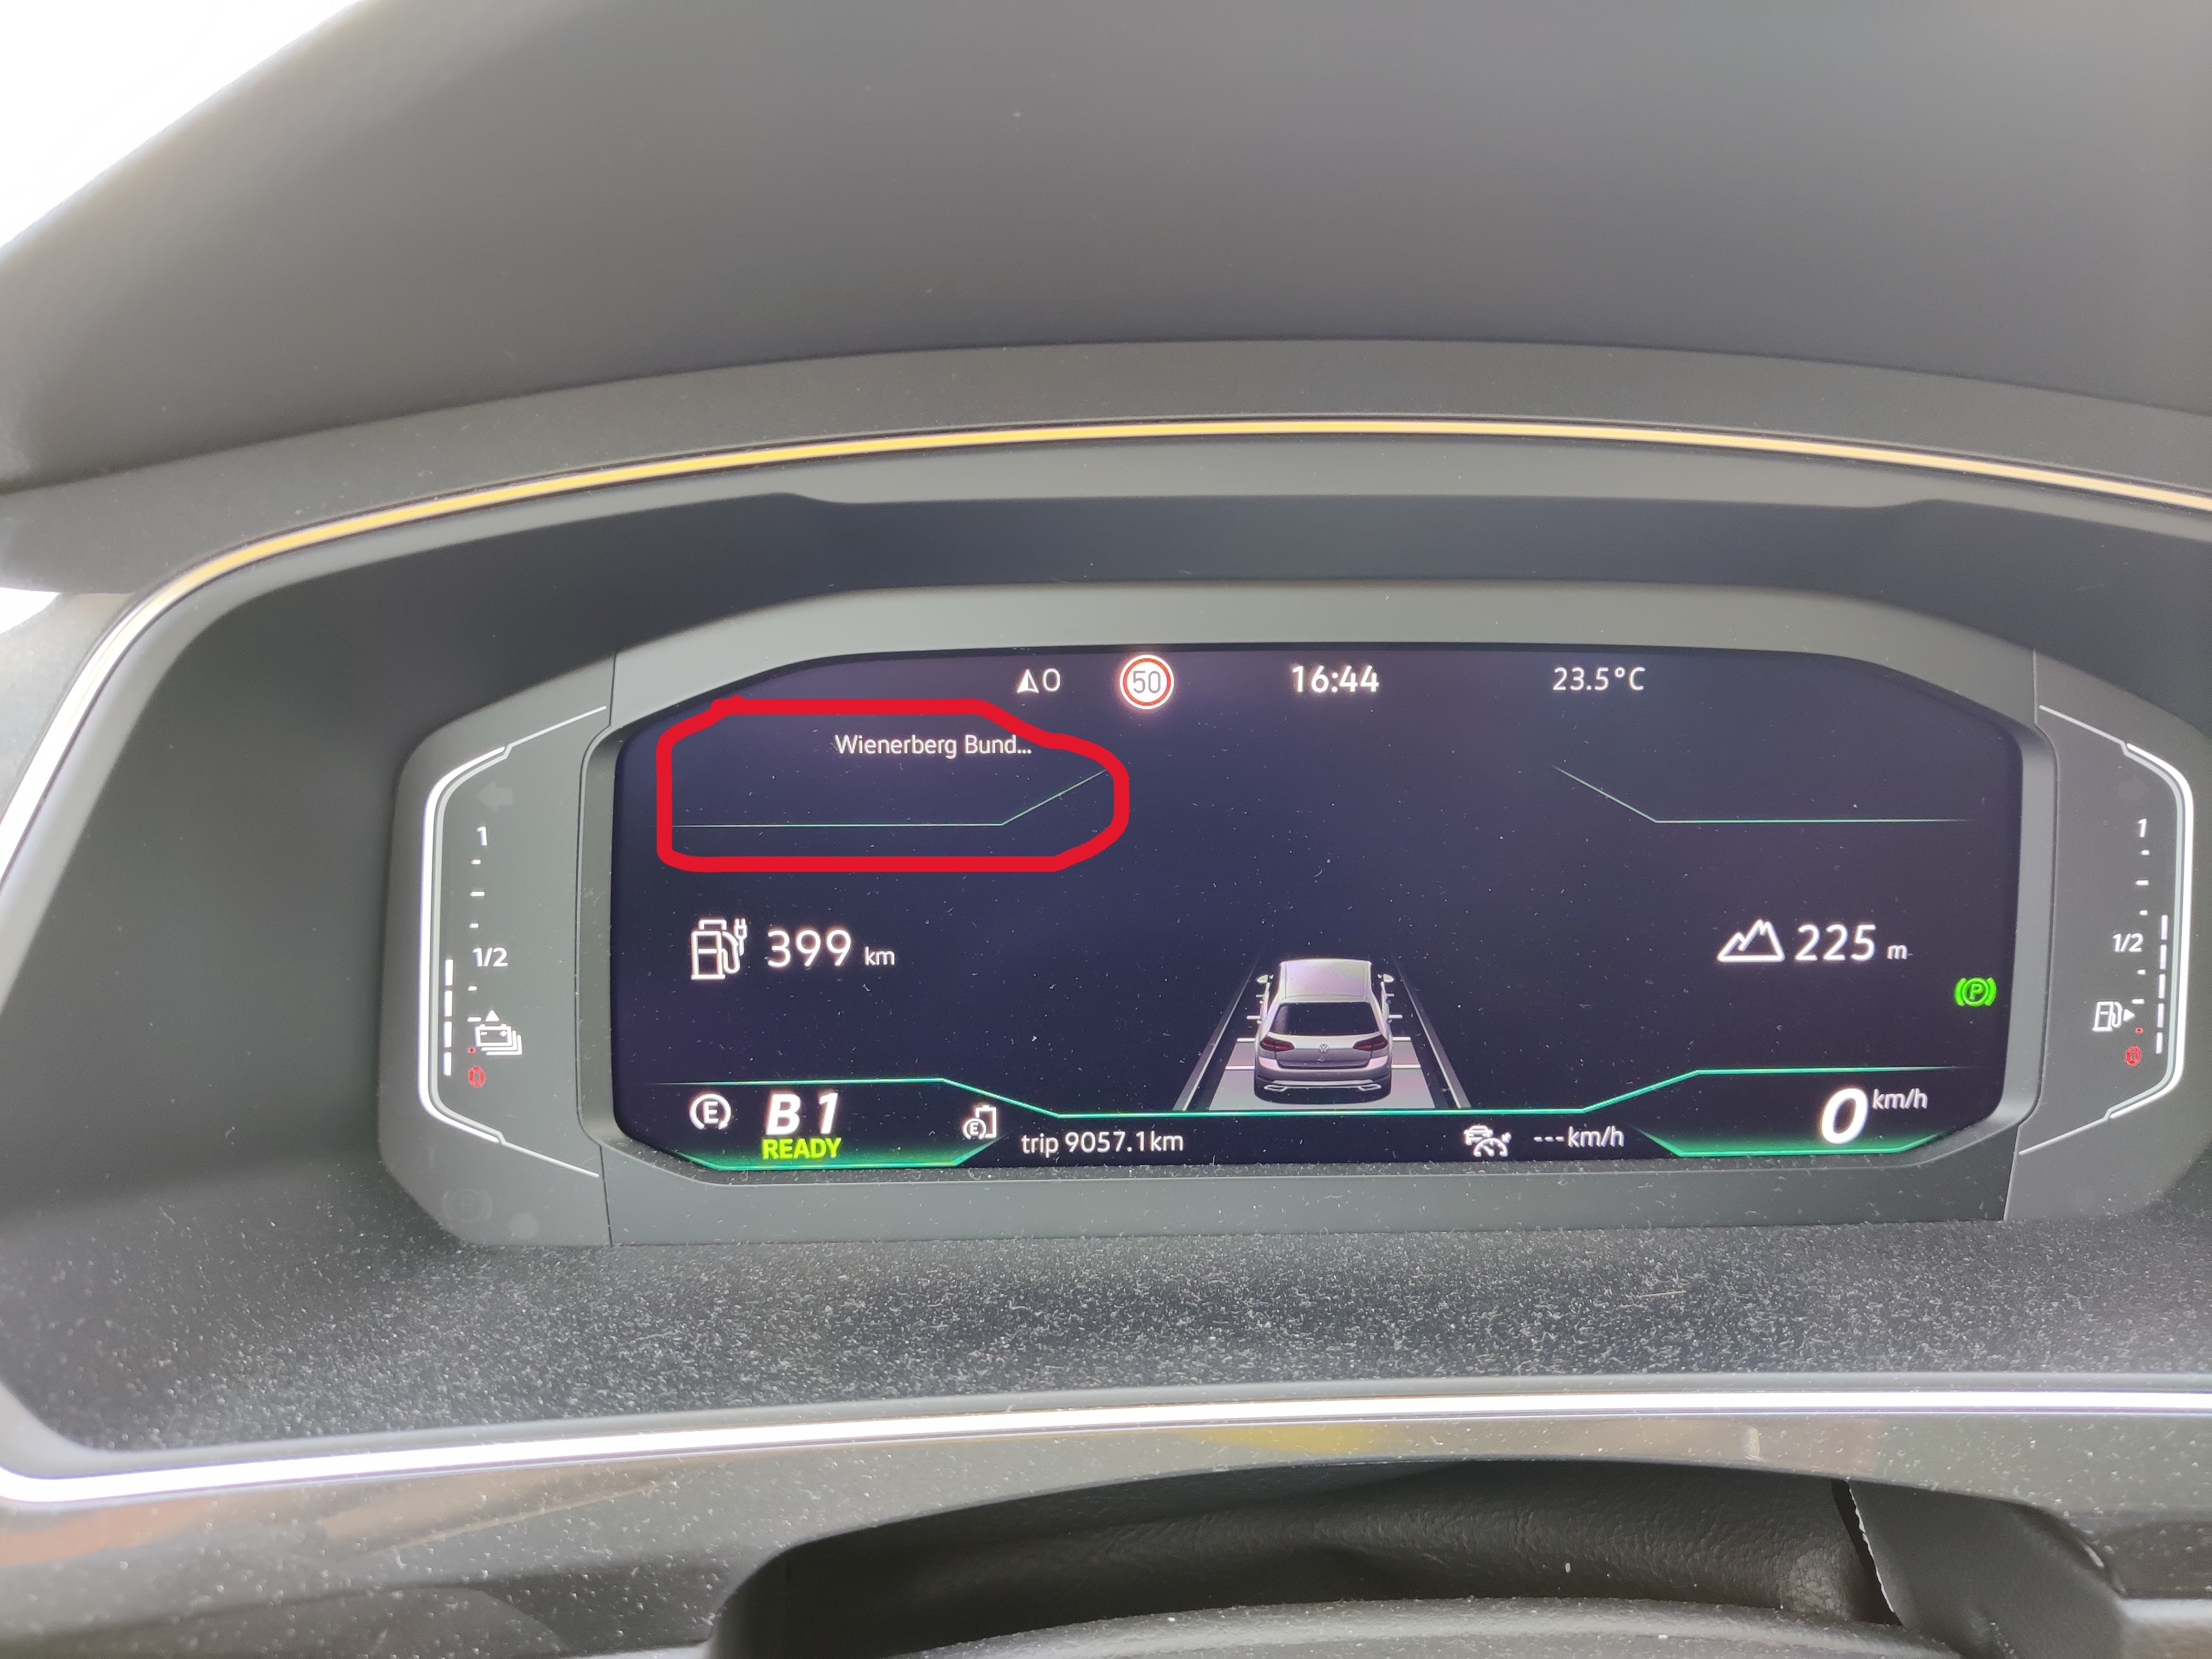 Not showing Waze directions on main dashboard screen (only showing VW  navigation). Any suggestions how to add it? : r/Tiguan